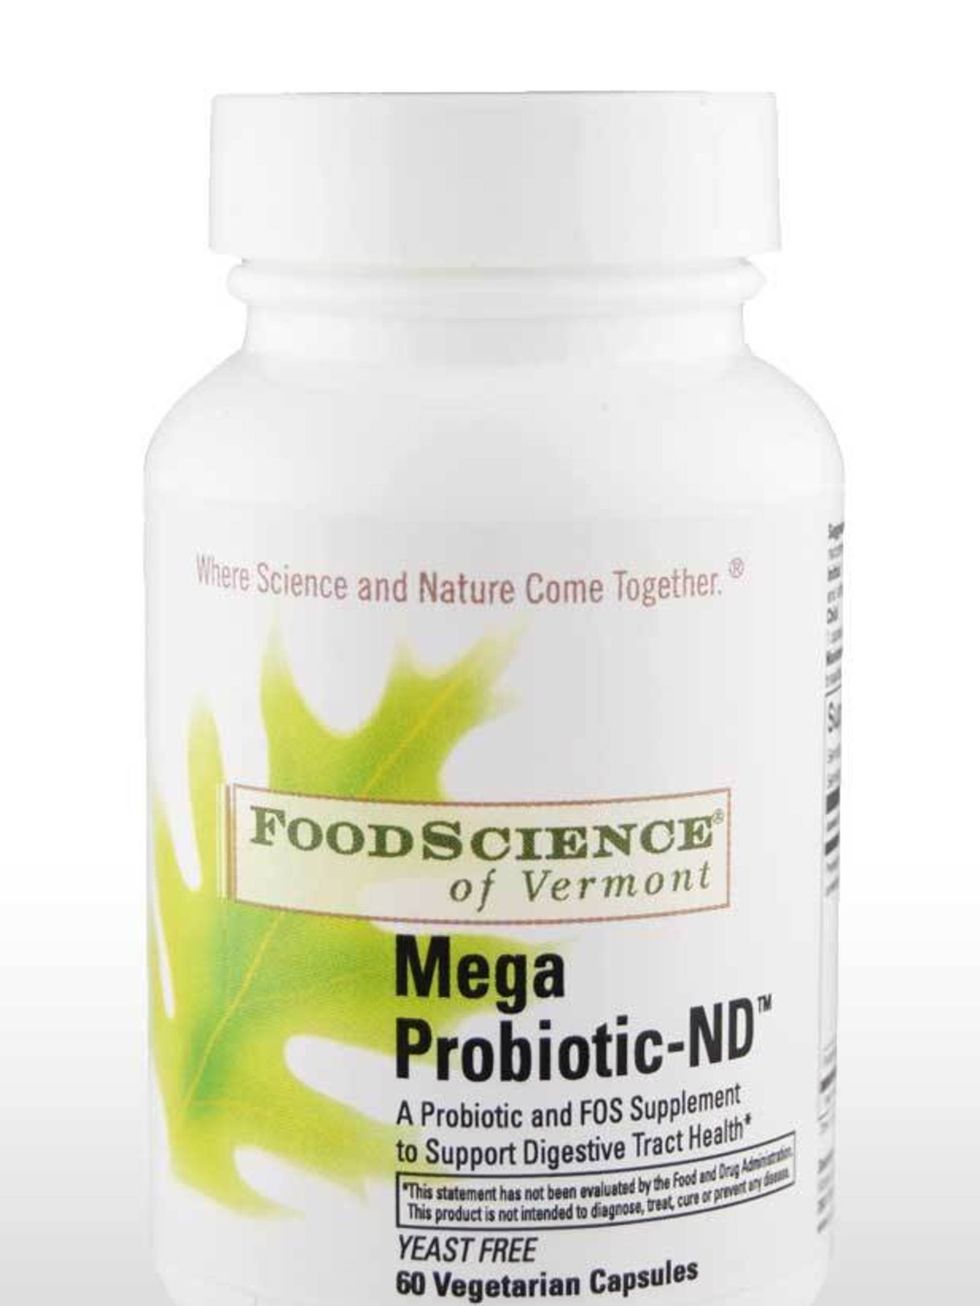 <p>You are probably aware that we all have millions of bacteria living inside our bodies, some good and some not so good. On the good side is probiotics - a healthy bacteria found in the intestines and gut. Probiotics improve overall wellbeing, keep the i